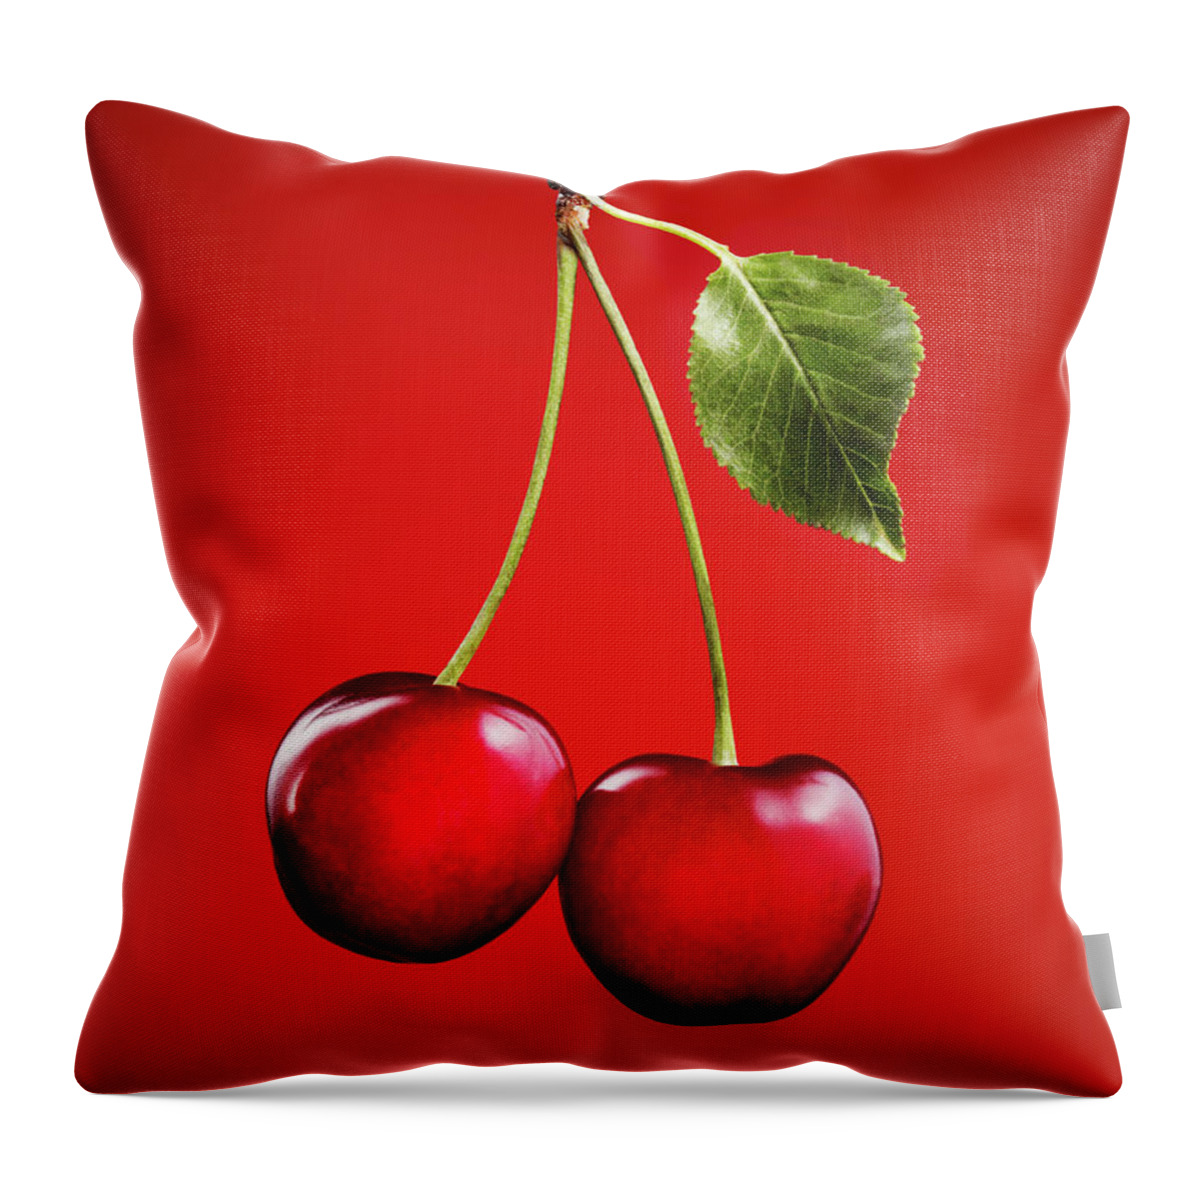 Cherry Throw Pillow featuring the photograph Cherries With Leaf On Red Background by Lauren Burke